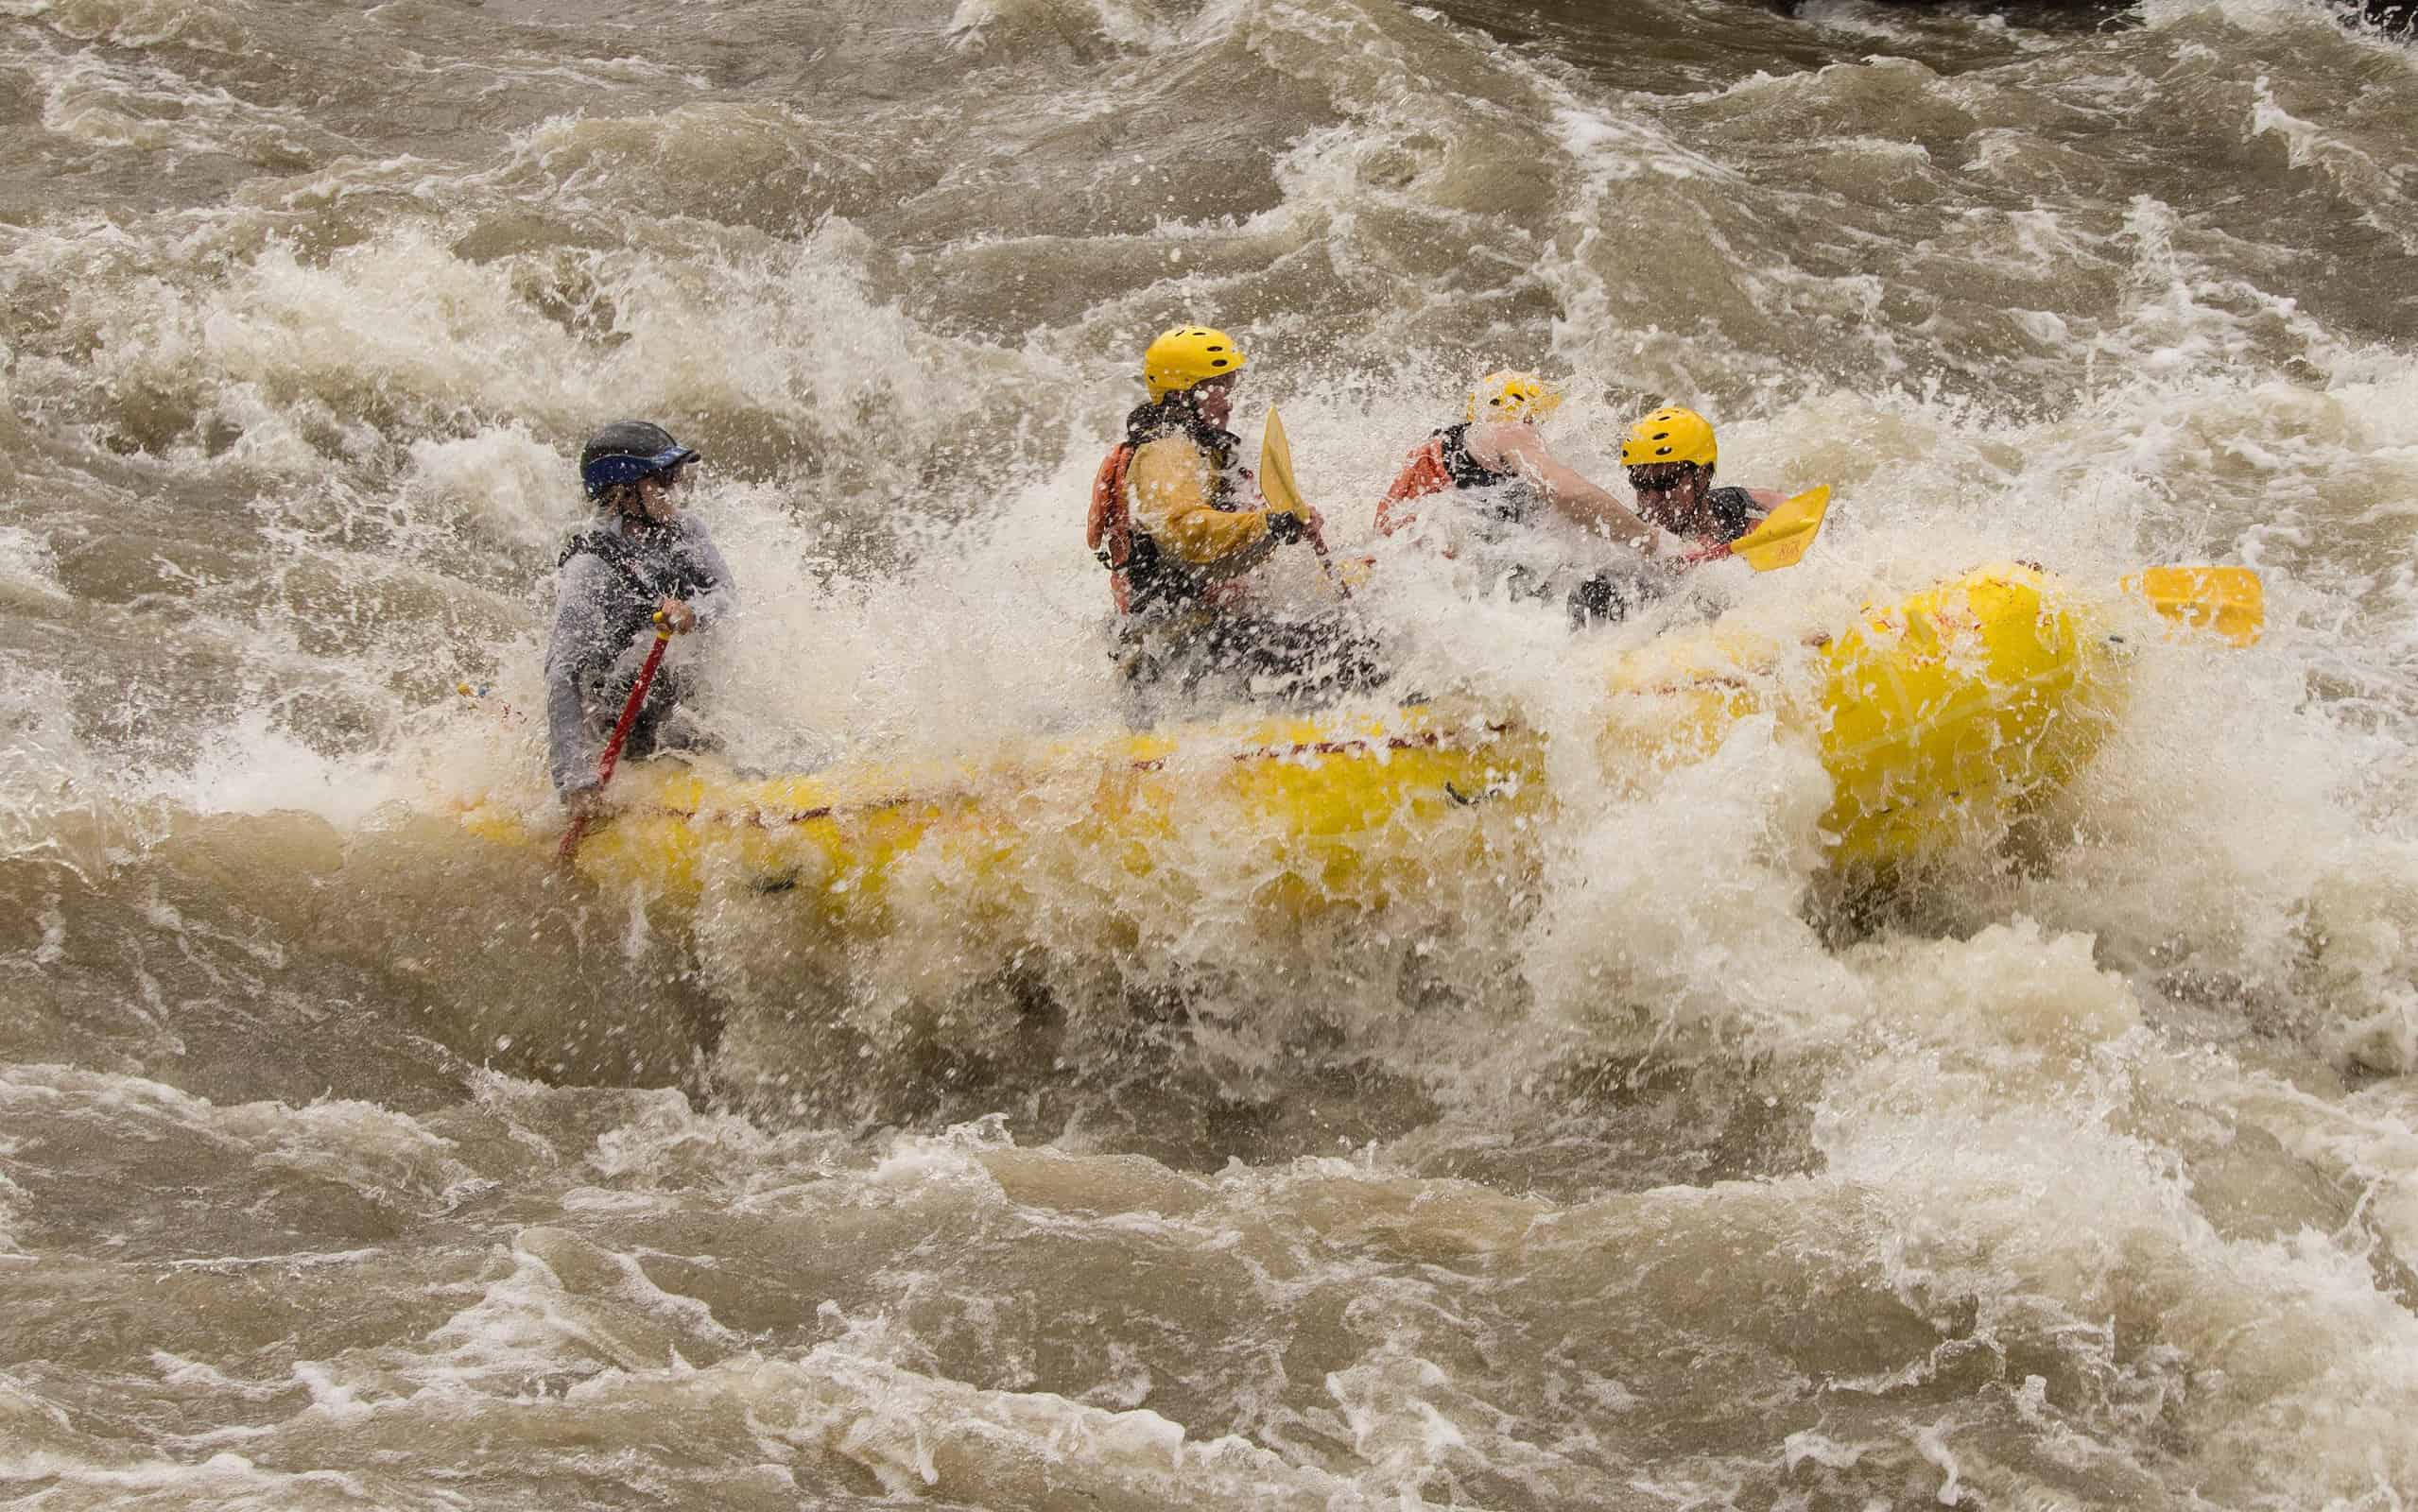 Whitewater Rafting on the Arkansas River